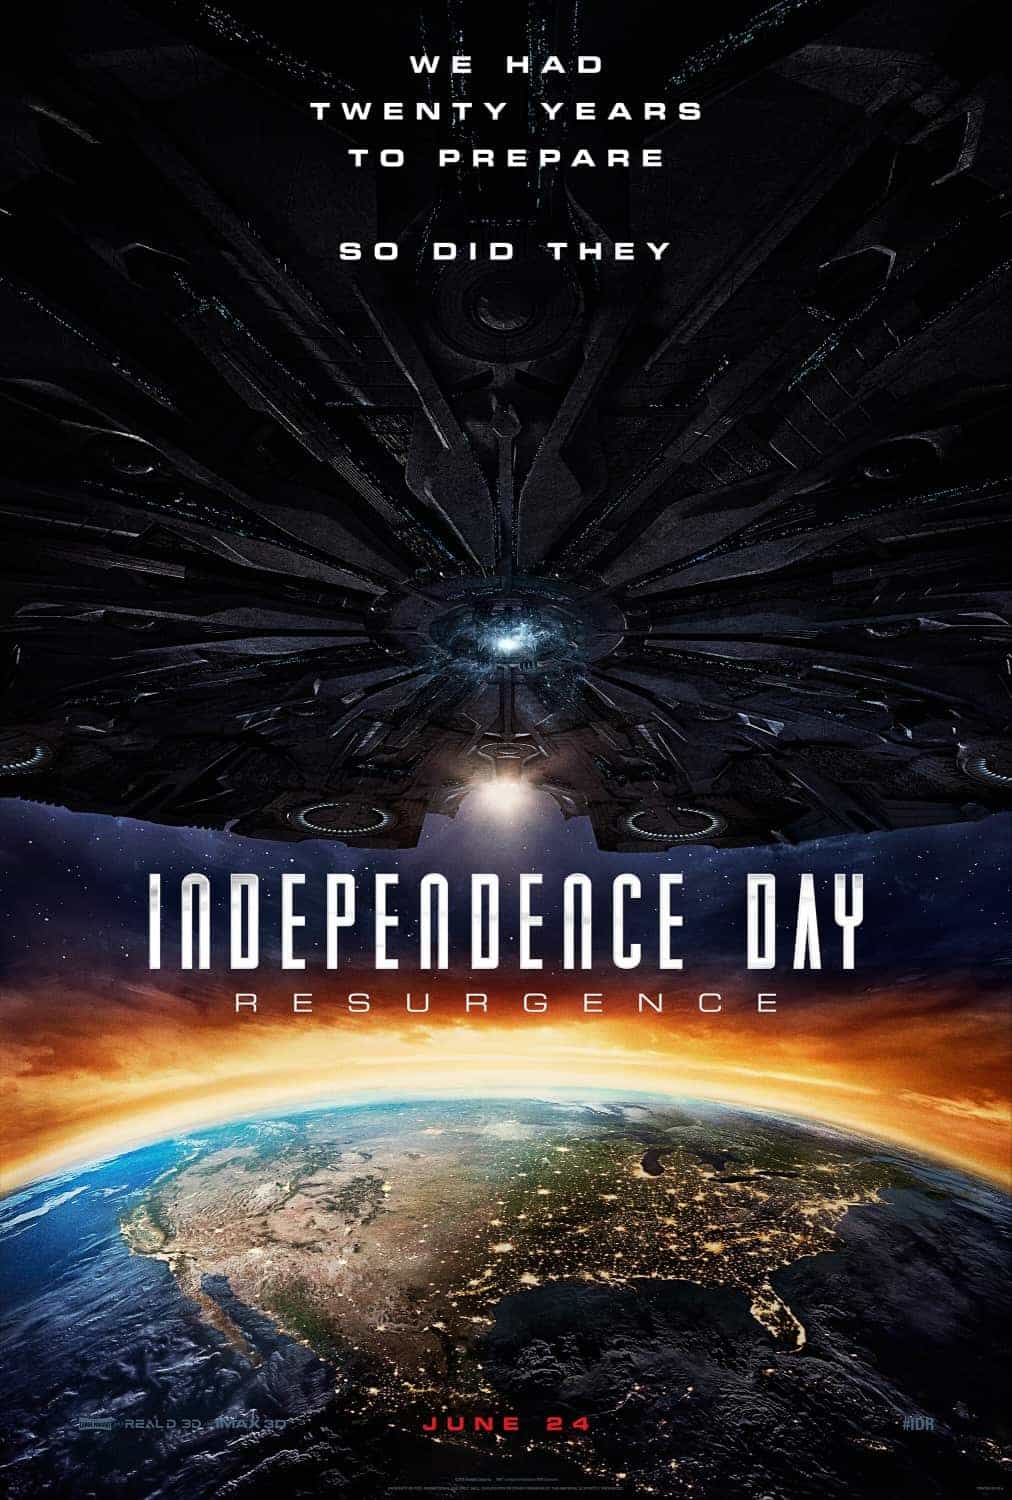 World Box Office Weekending 26 June 2016:  Independence Day 2 makes a strong debut